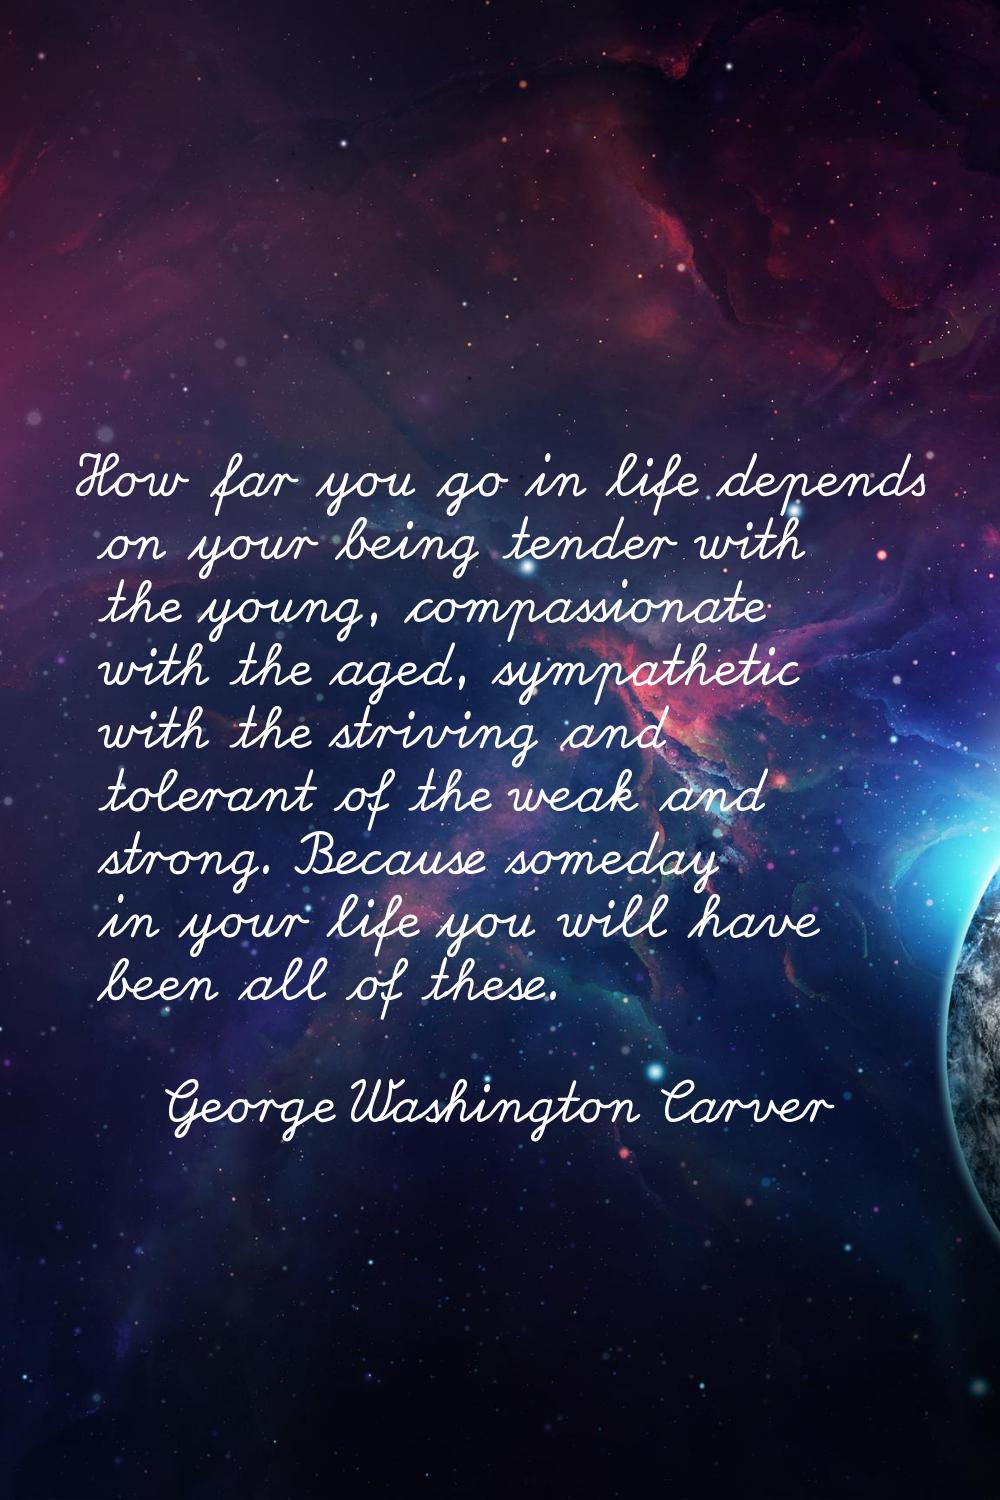 How far you go in life depends on your being tender with the young, compassionate with the aged, sy